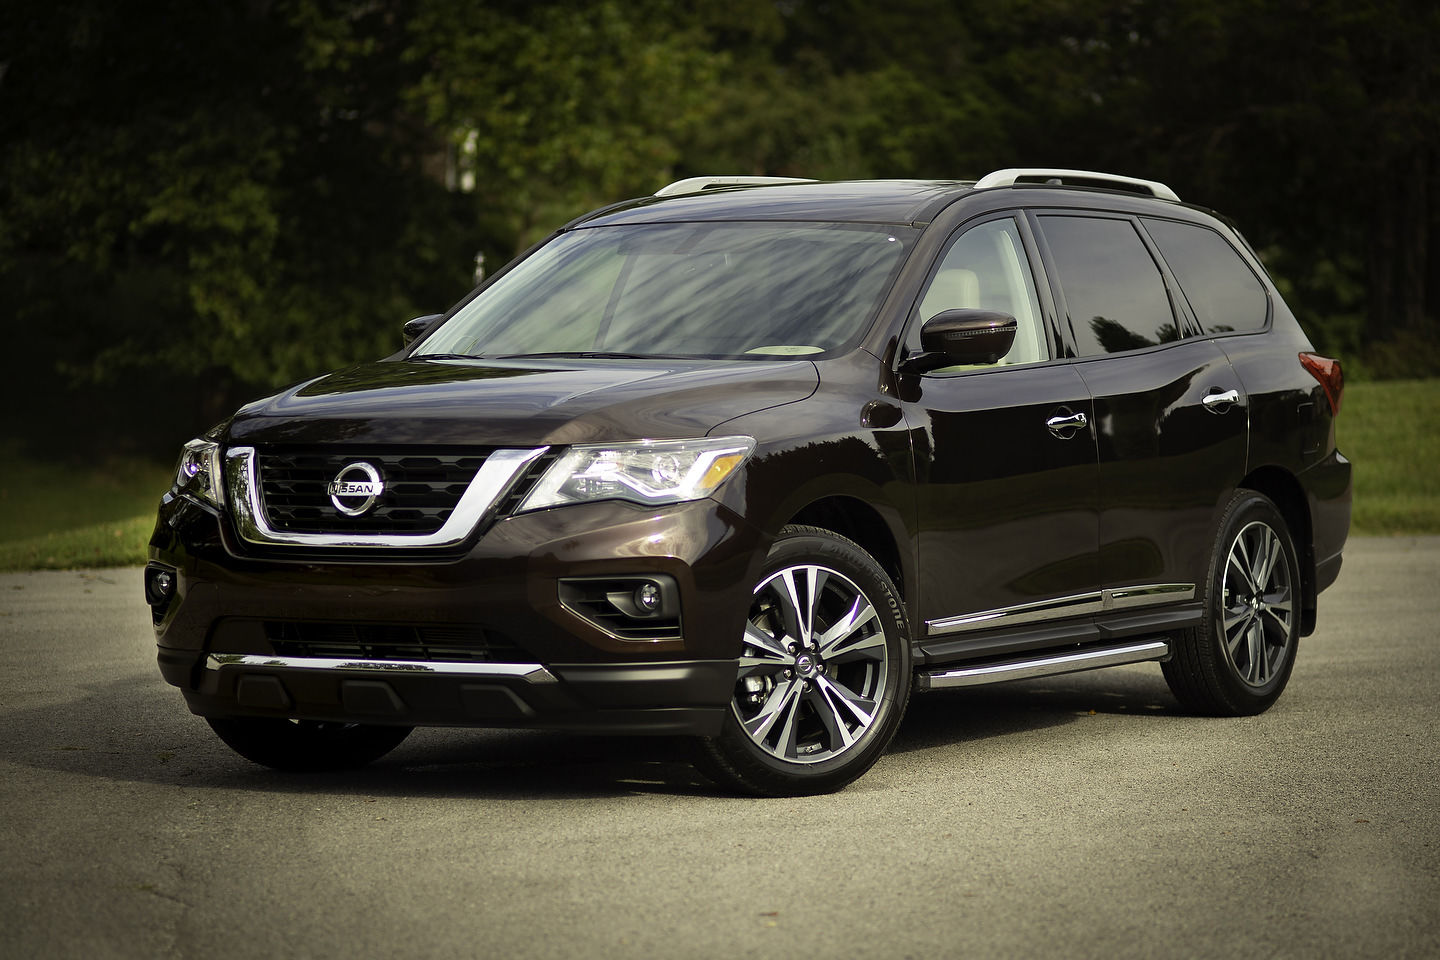 Own winter with the 2019 Nissan Pathfinder